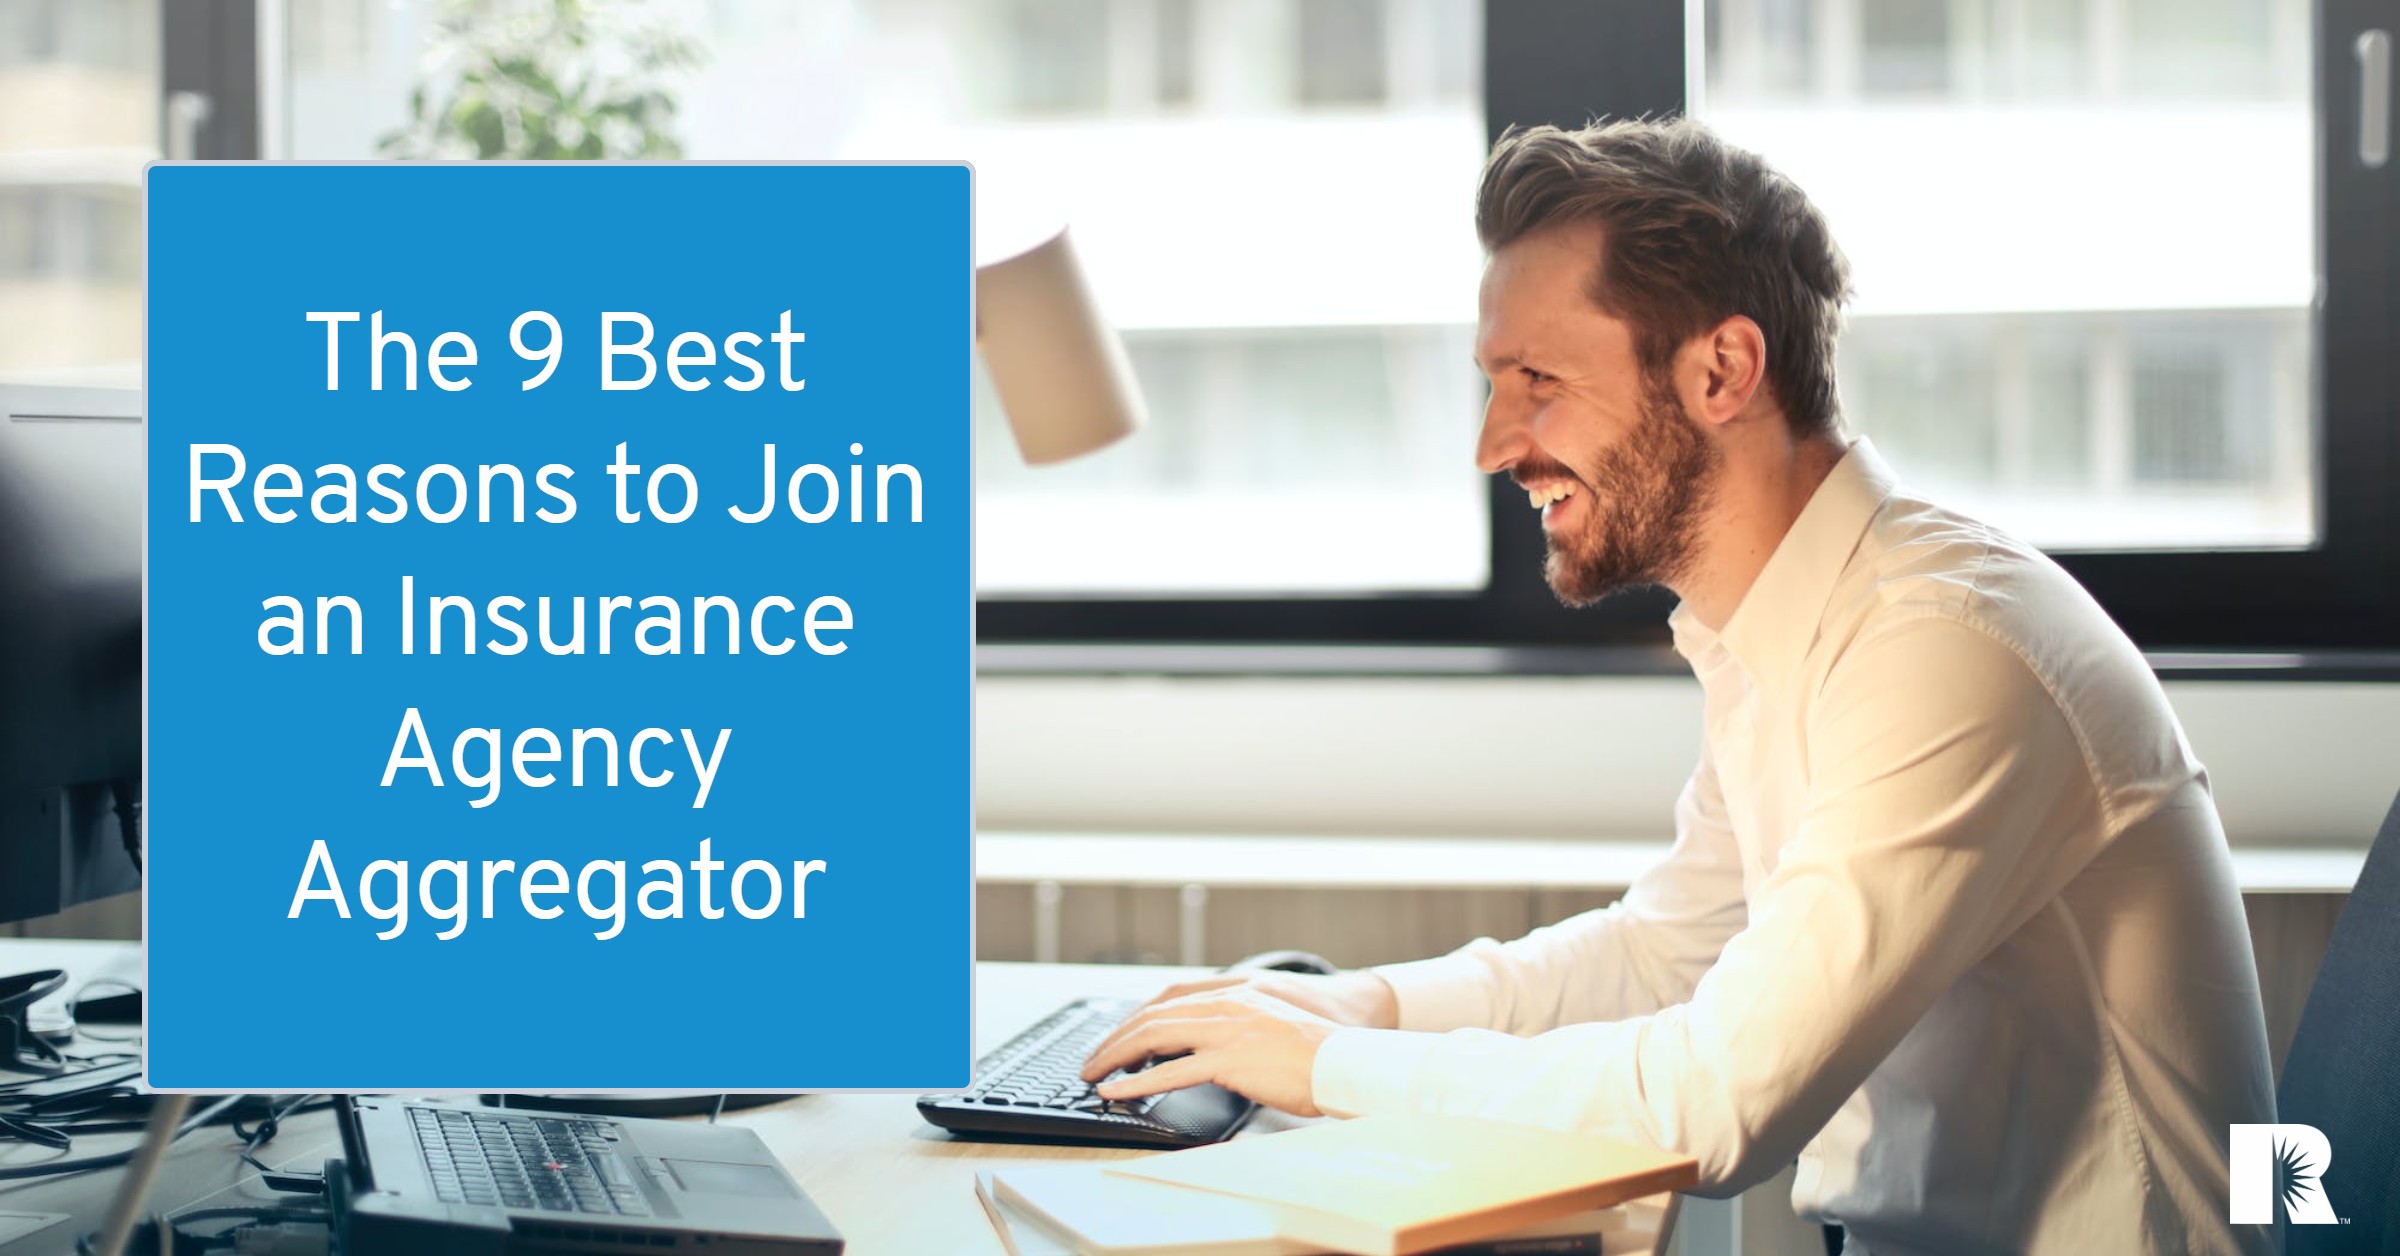 An insurance agent discovers the benefits of joining an agency aggregator.